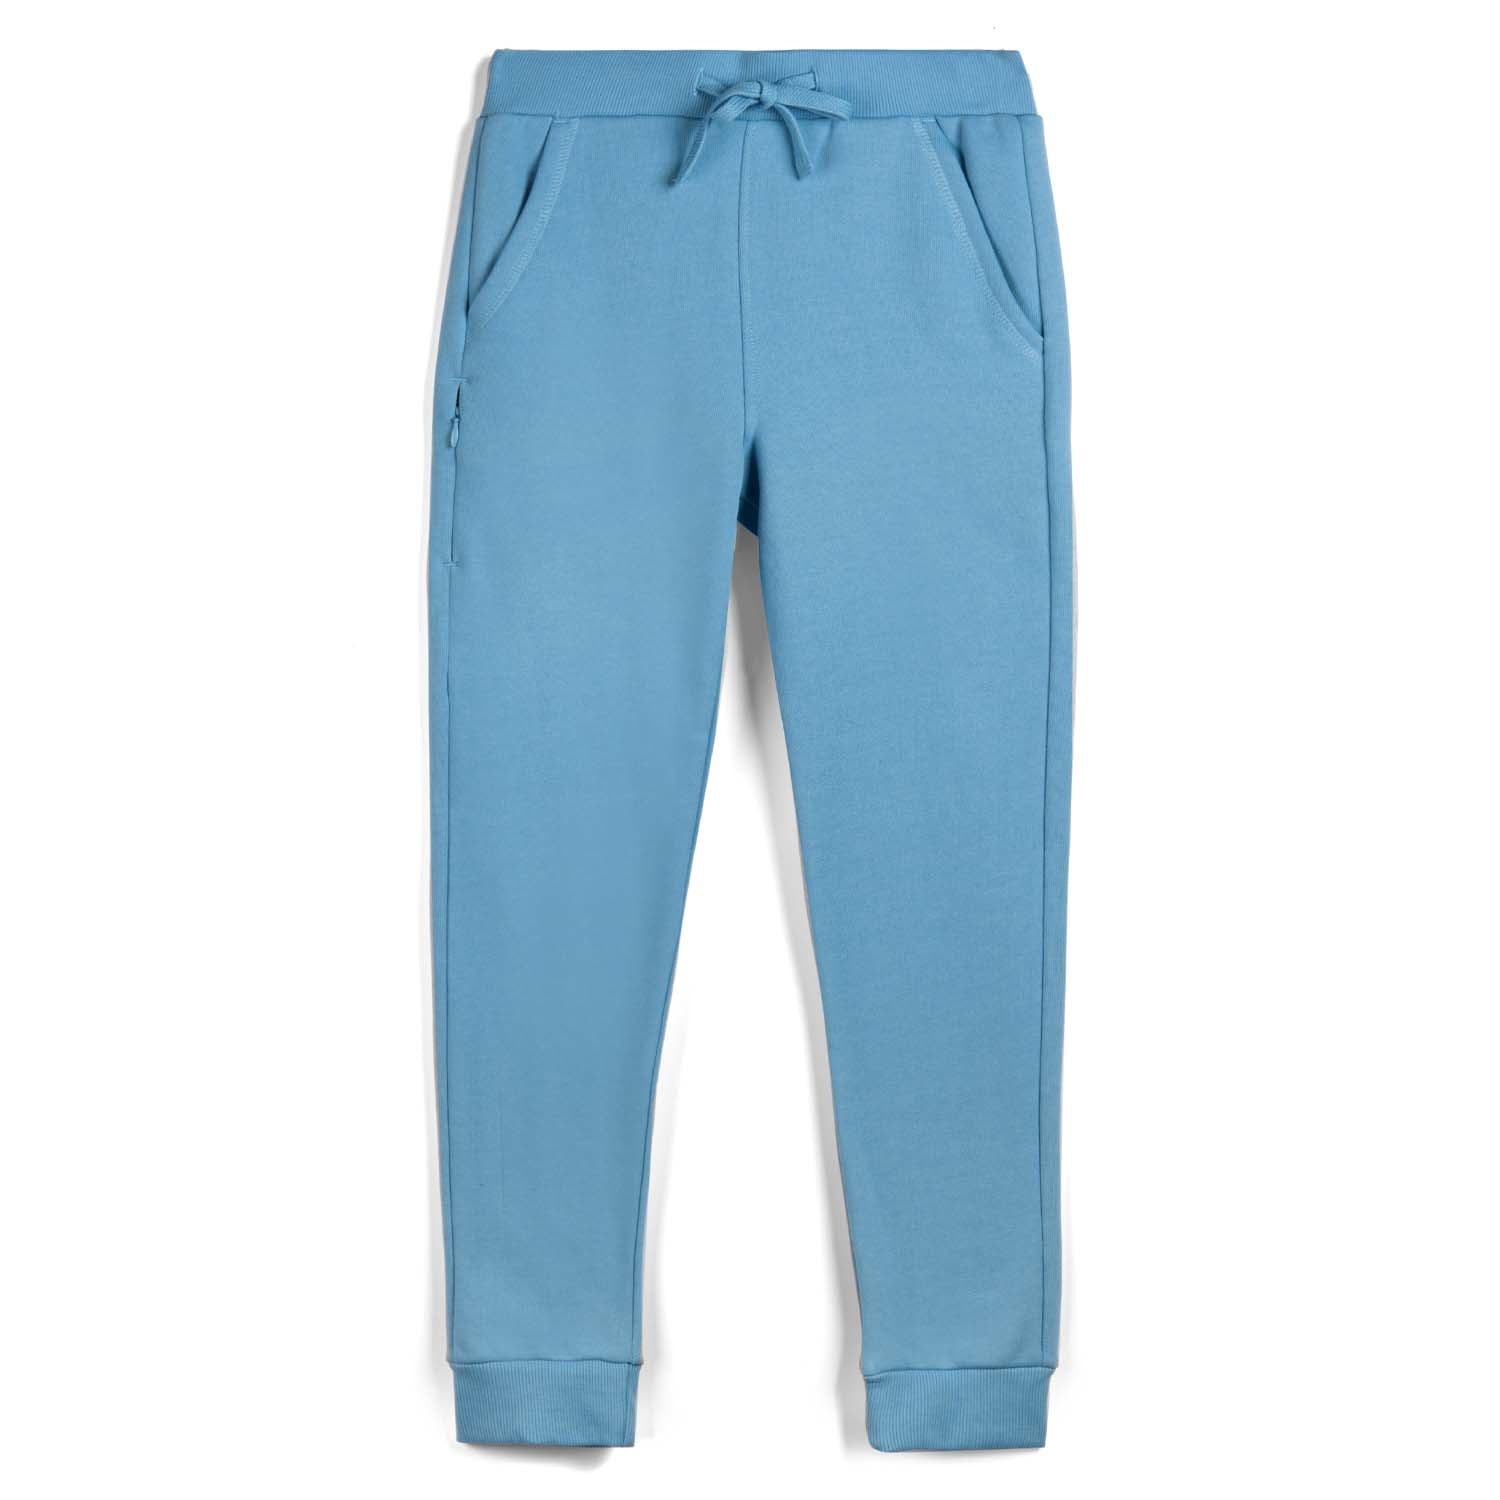 Nina Blue Cotton Lounge Pants AVAILABLE IN XXL STORE CREDIT OR EXCHANGE ONLY